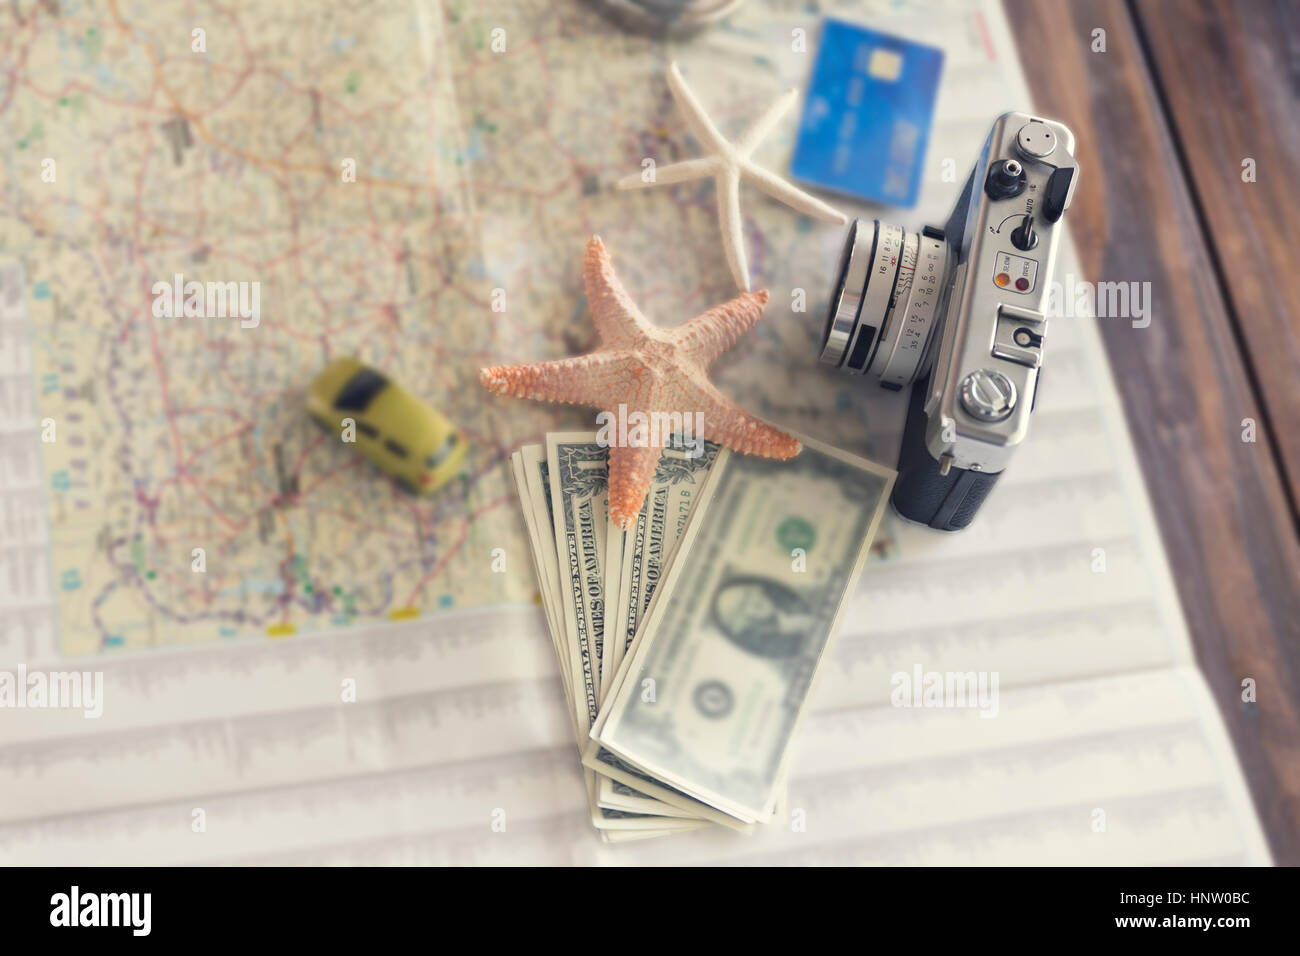 car figurine, camera, compass, credit card, banknote money, globe, map, starfish figurine on wooden table for use as traveling concept (vintage tone a Stock Photo